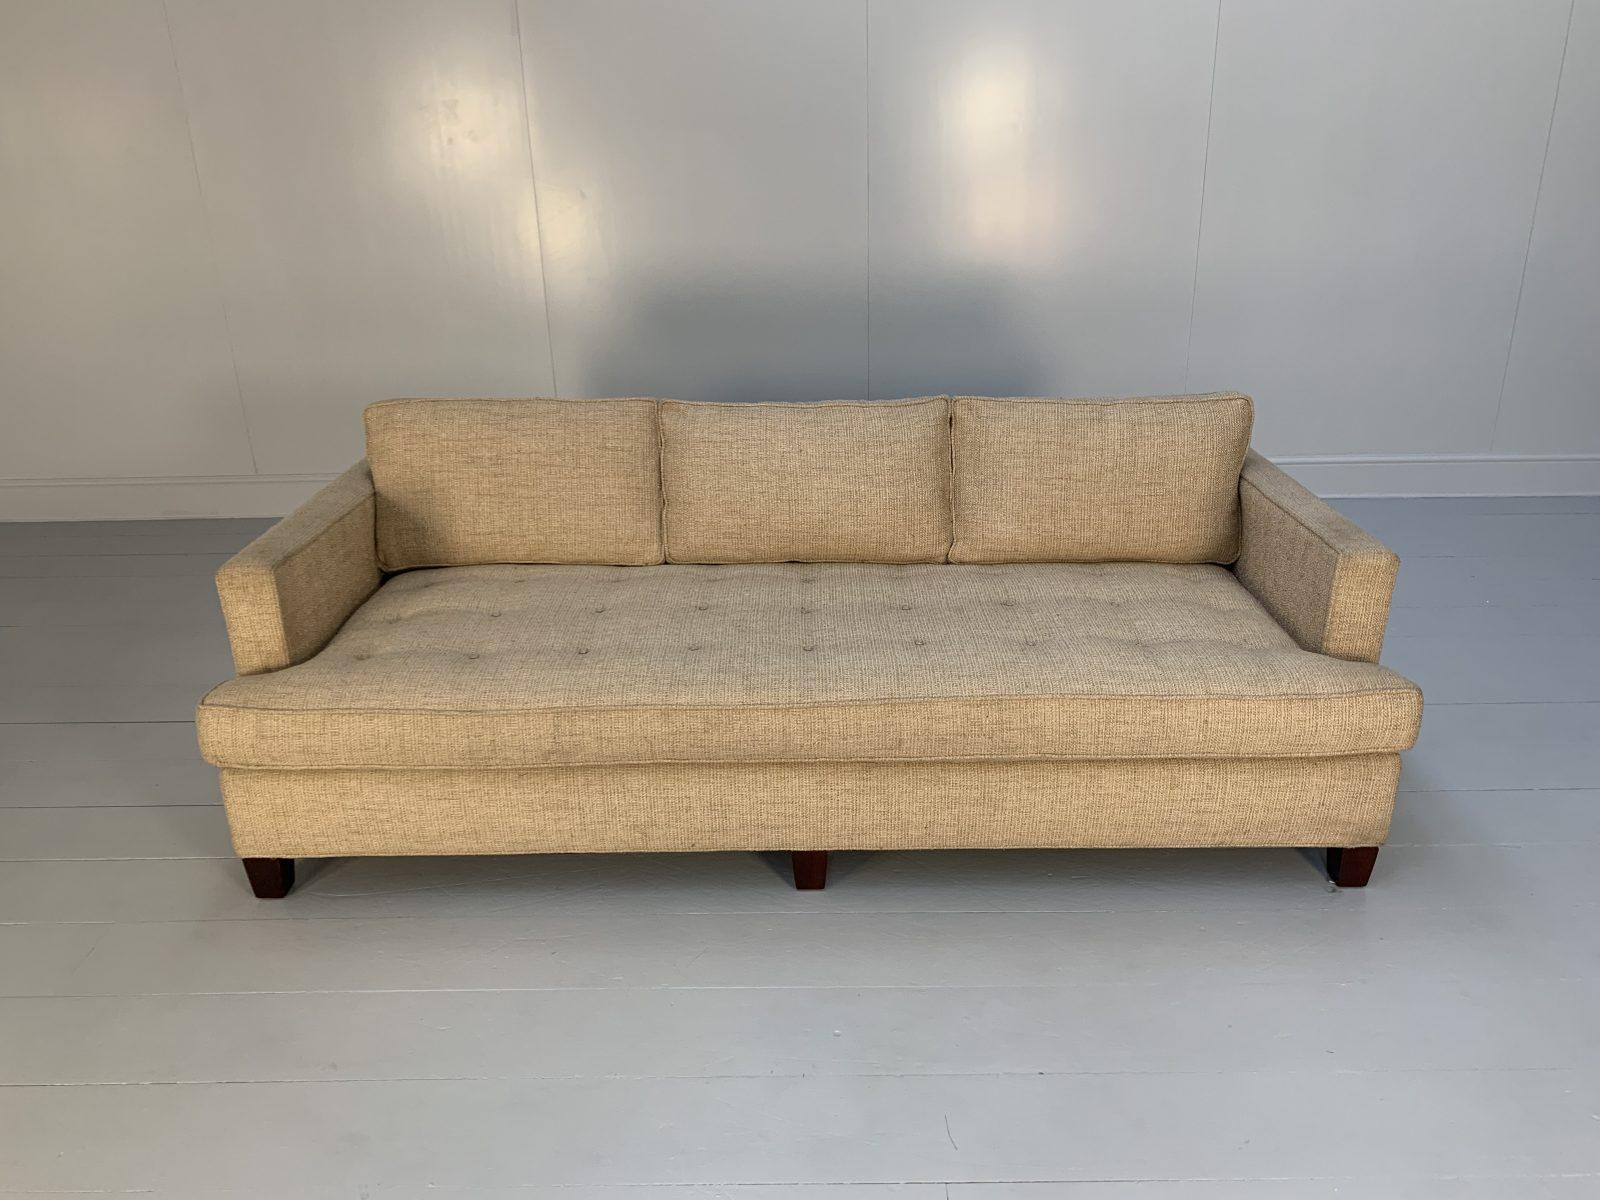 Ralph Lauren “Club” 3-Seat Sofa – In Woven Wool In Good Condition For Sale In Barrowford, GB